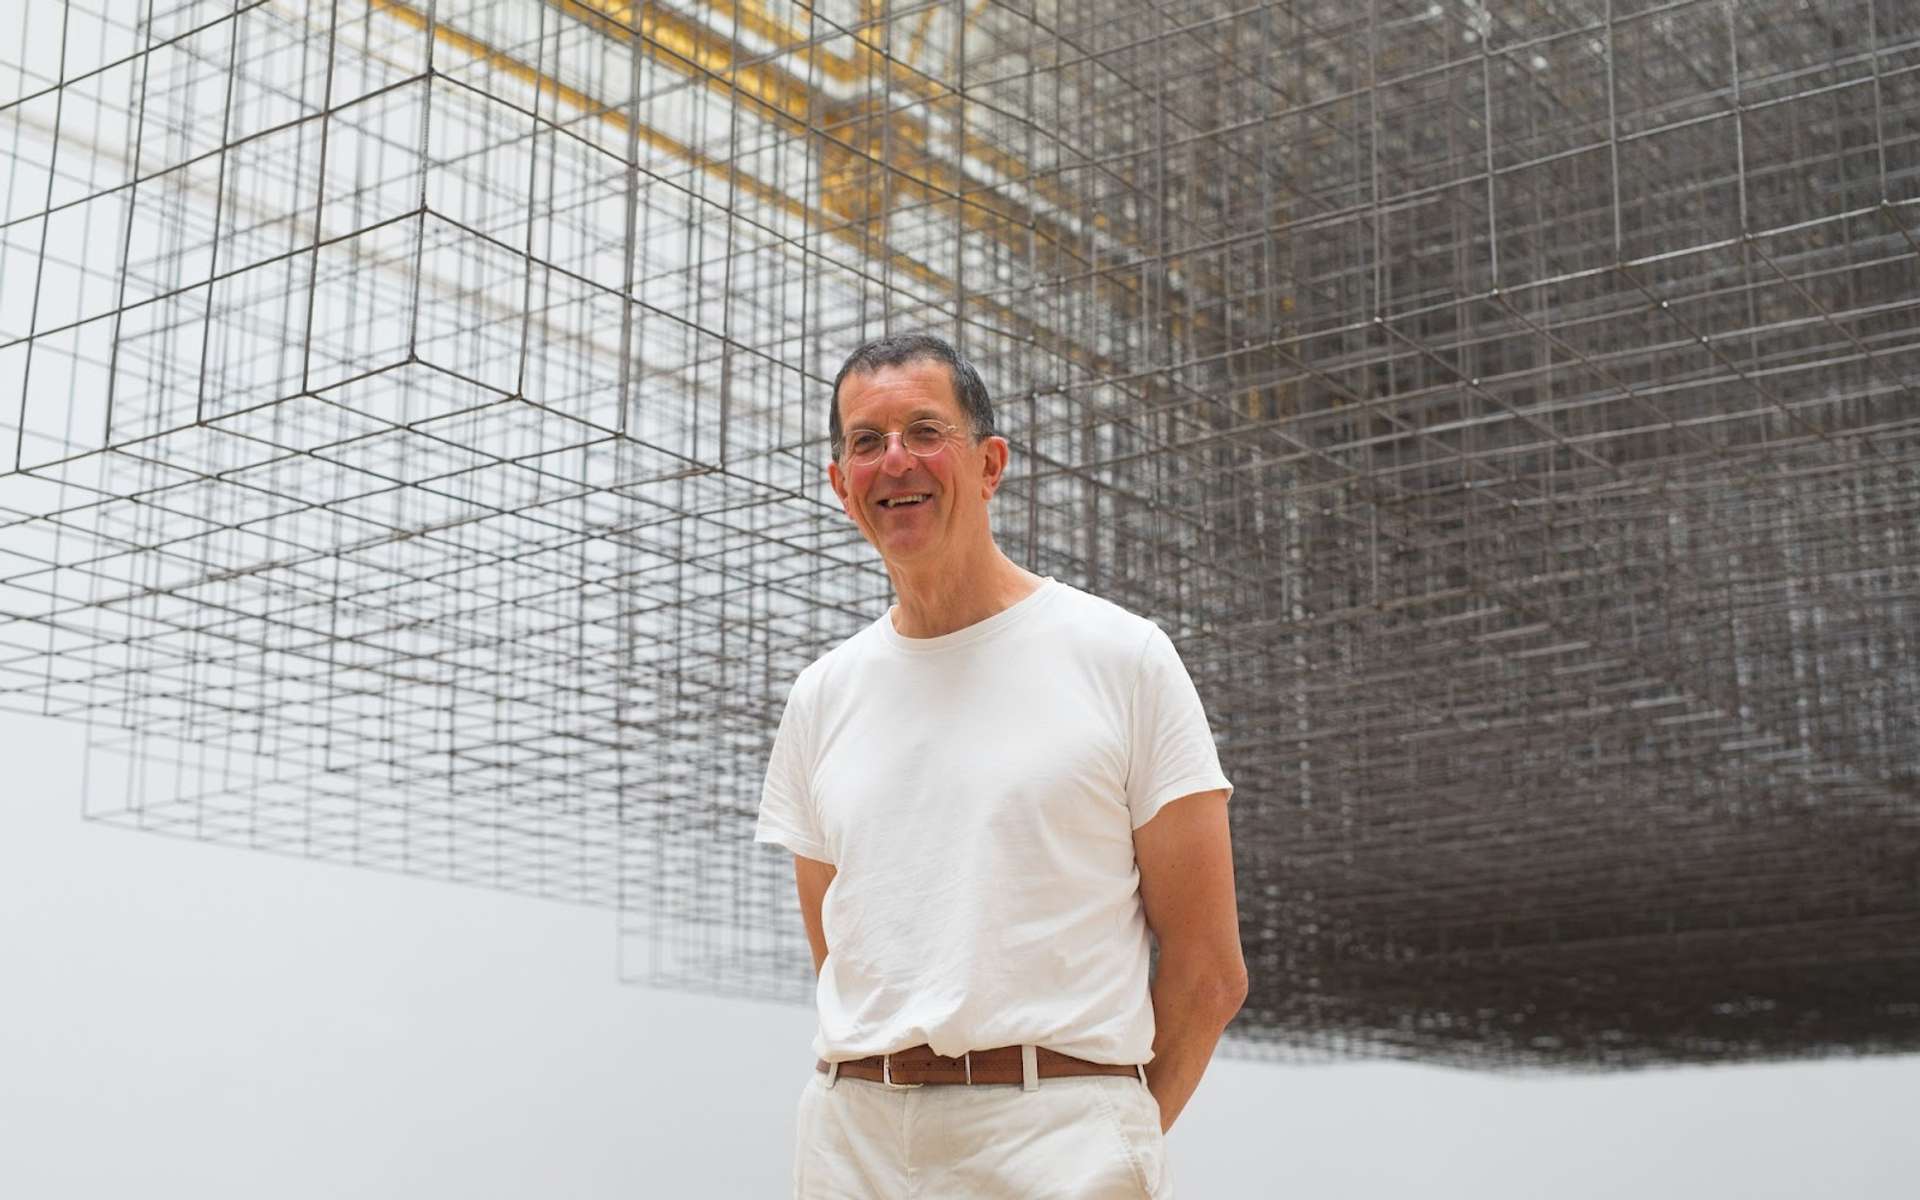  A picture of artist Antony Gormley standing in front of one of his works. He is wearing a white t-shirt and smiling at the camera.